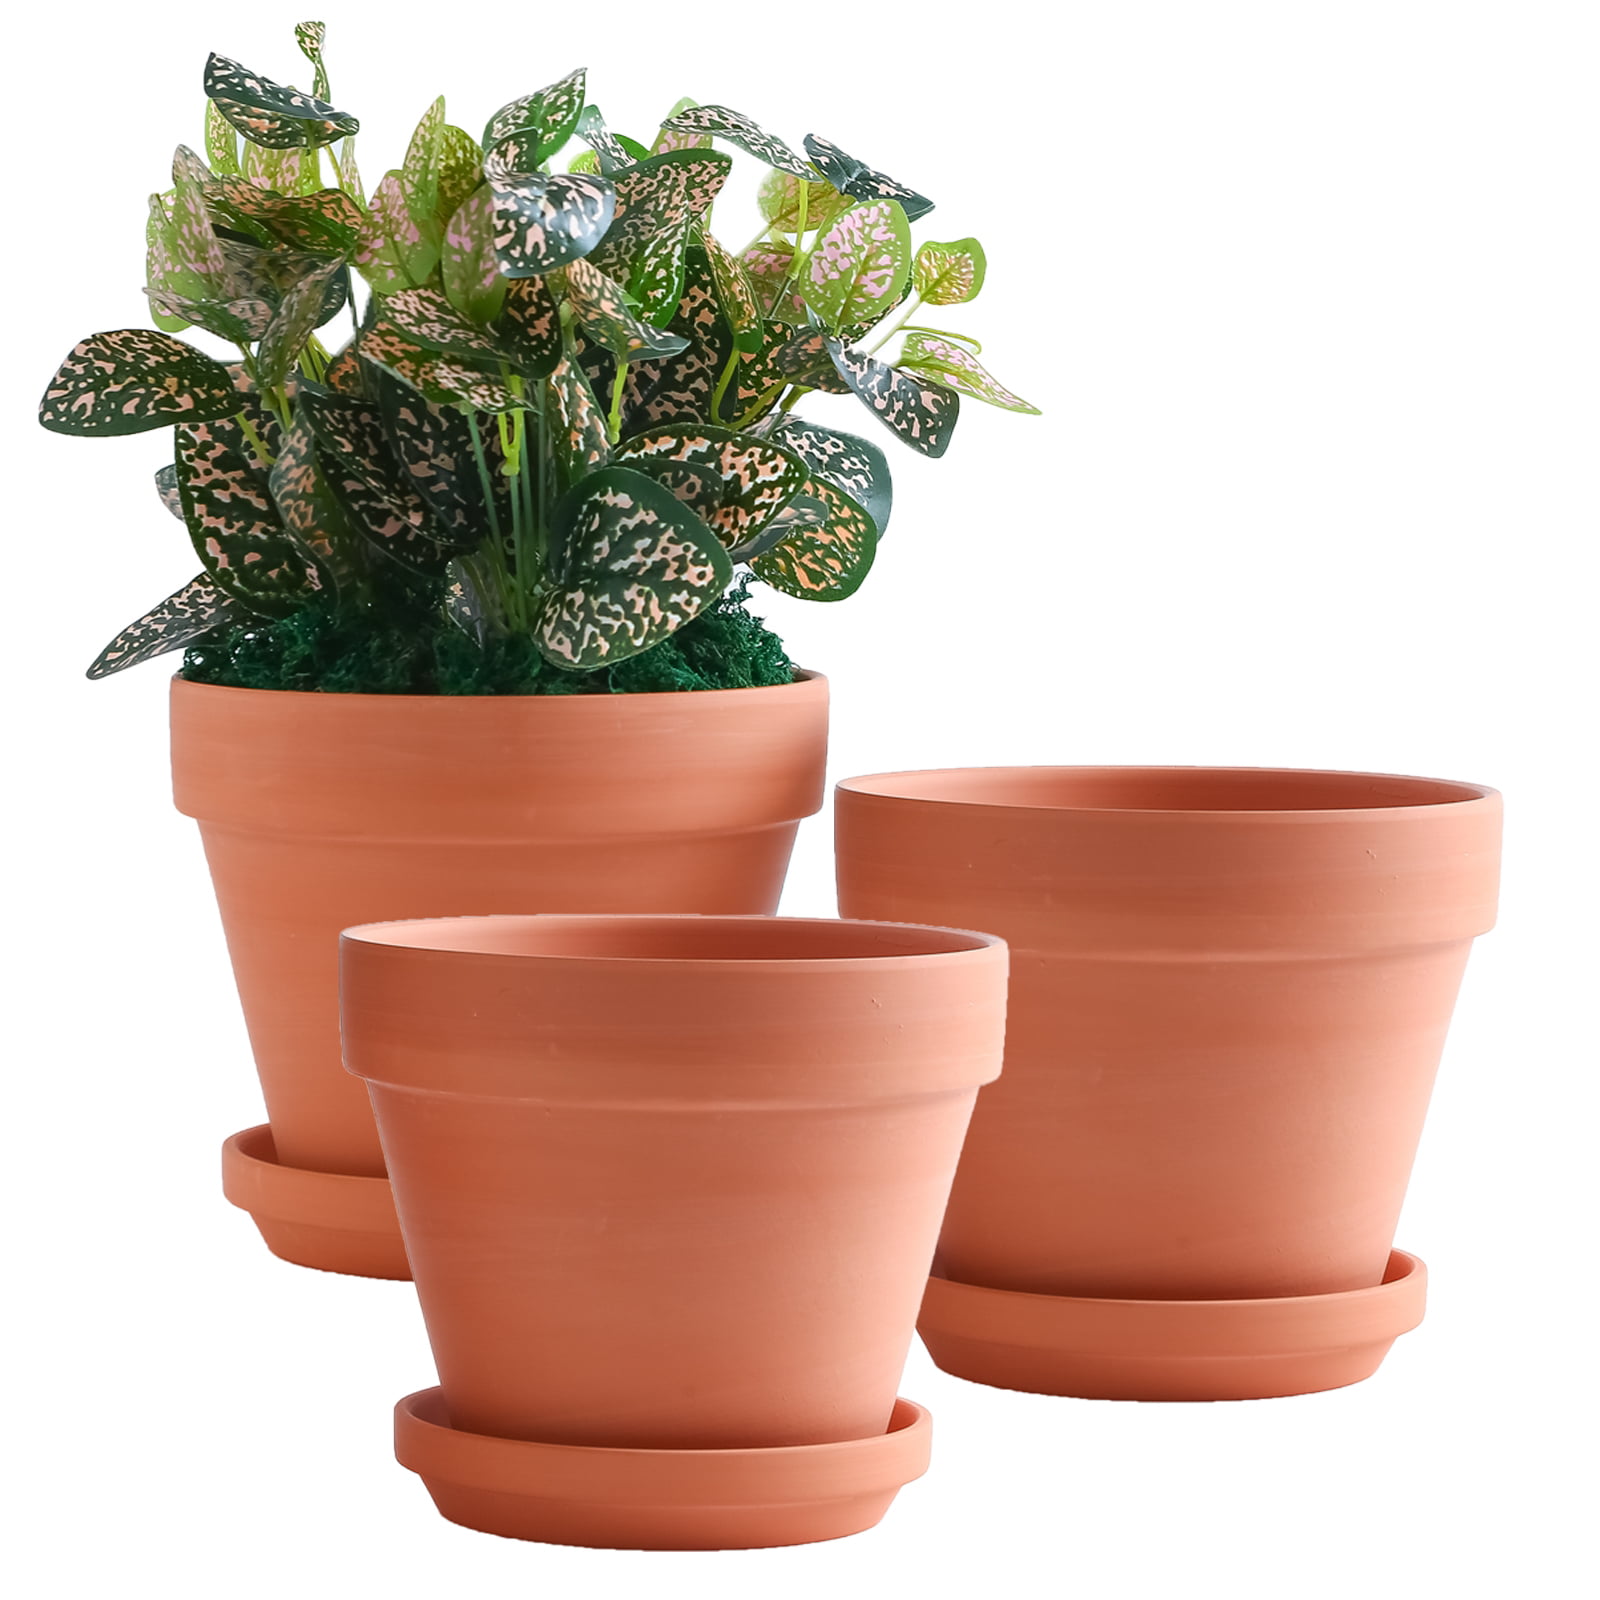 YISHANG 8 Inch Clay Pot for Plant with Saucer - 3 Pack Large Terra 